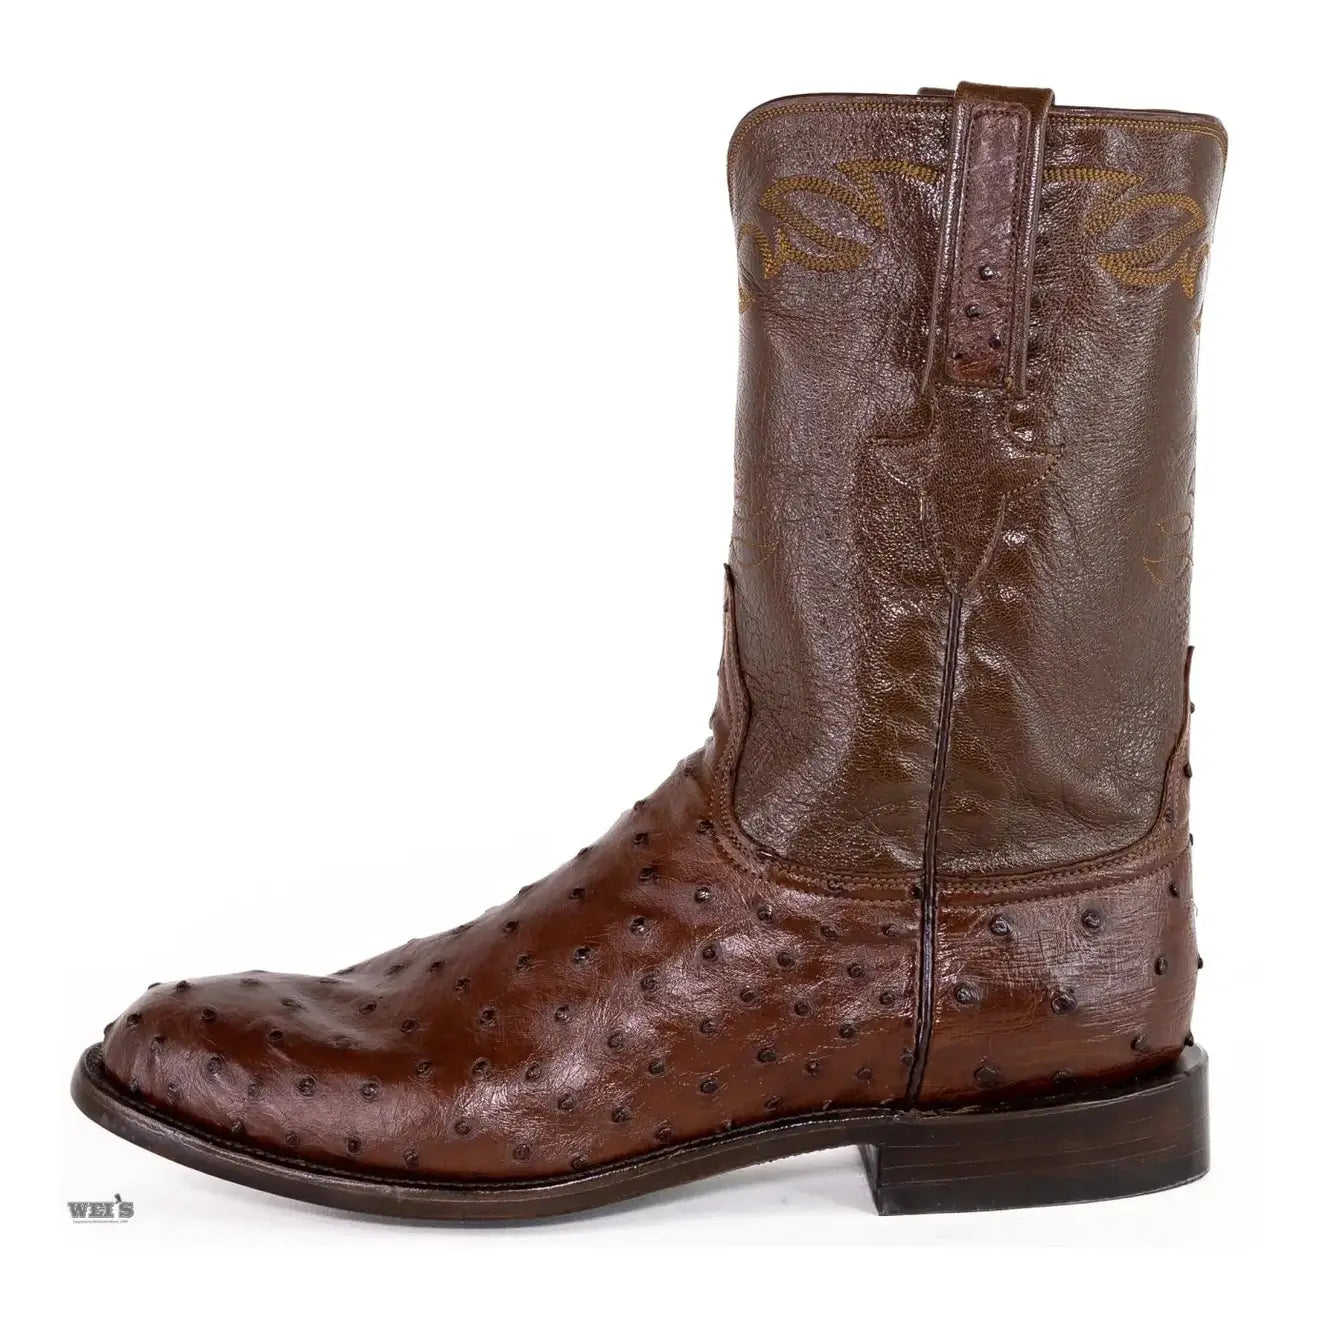 Lucchese Men's Cowboy Boots 12" Exotic Ostrich Roper Style E2024.RR